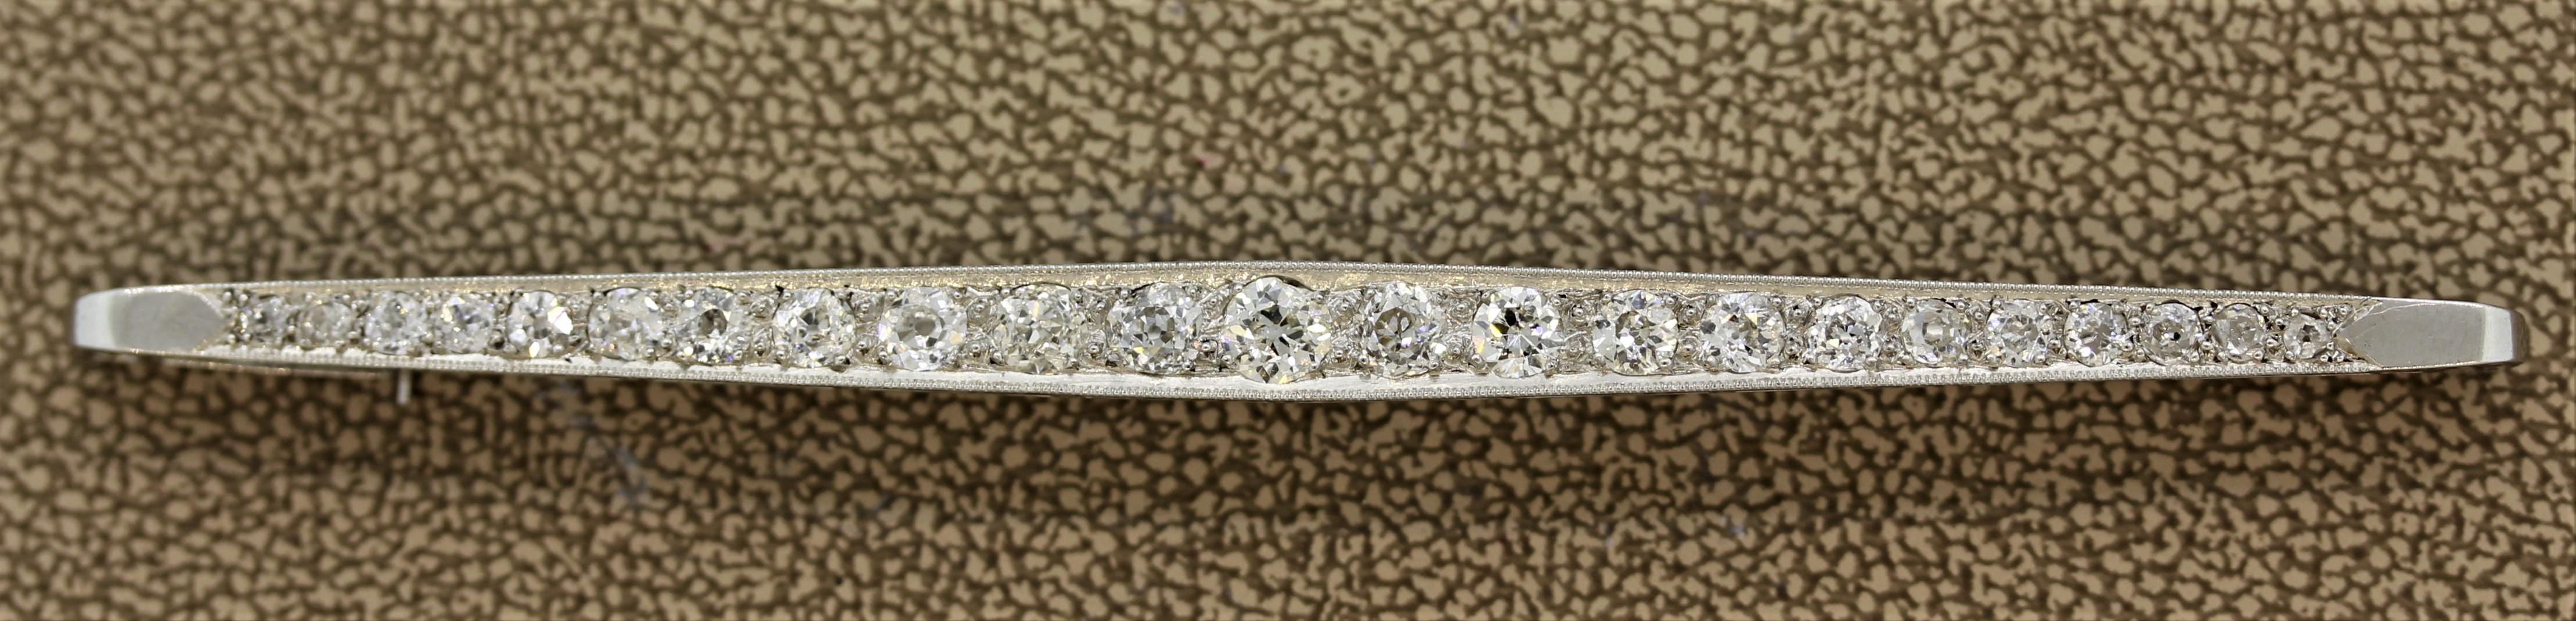 A classic piece from the early 1900’s, this Edwardian treasure features approximately 2 carats of old mine cut diamonds. Set in a long platinum bar, this piece is still in original condition.

Length: 3.5 inches